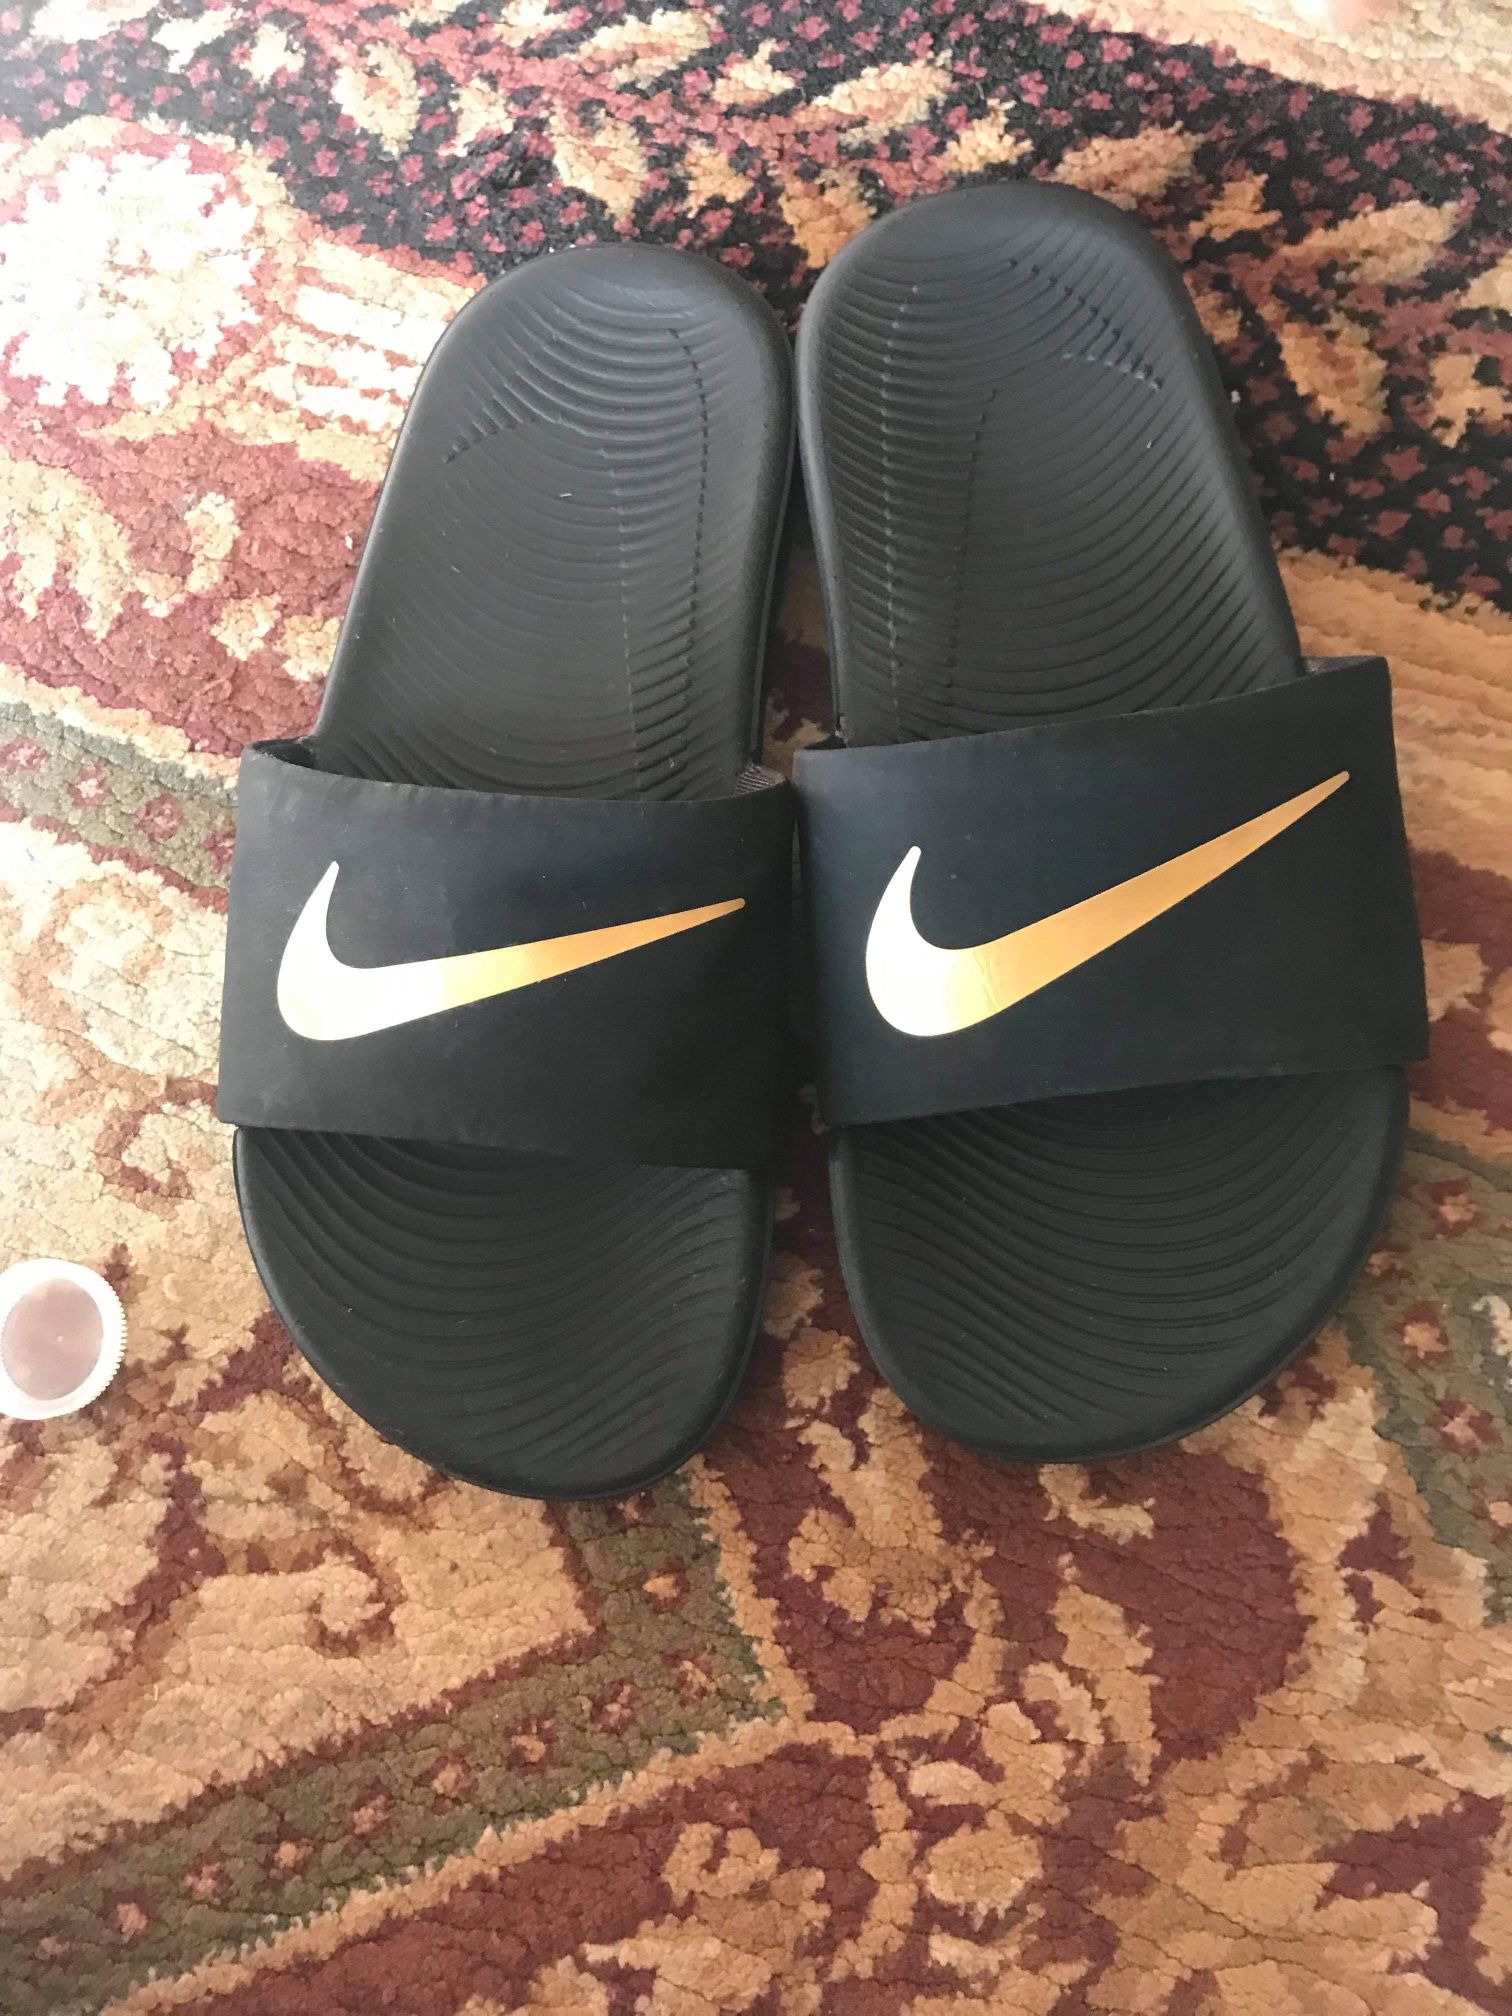 Nike Slippers Size 1